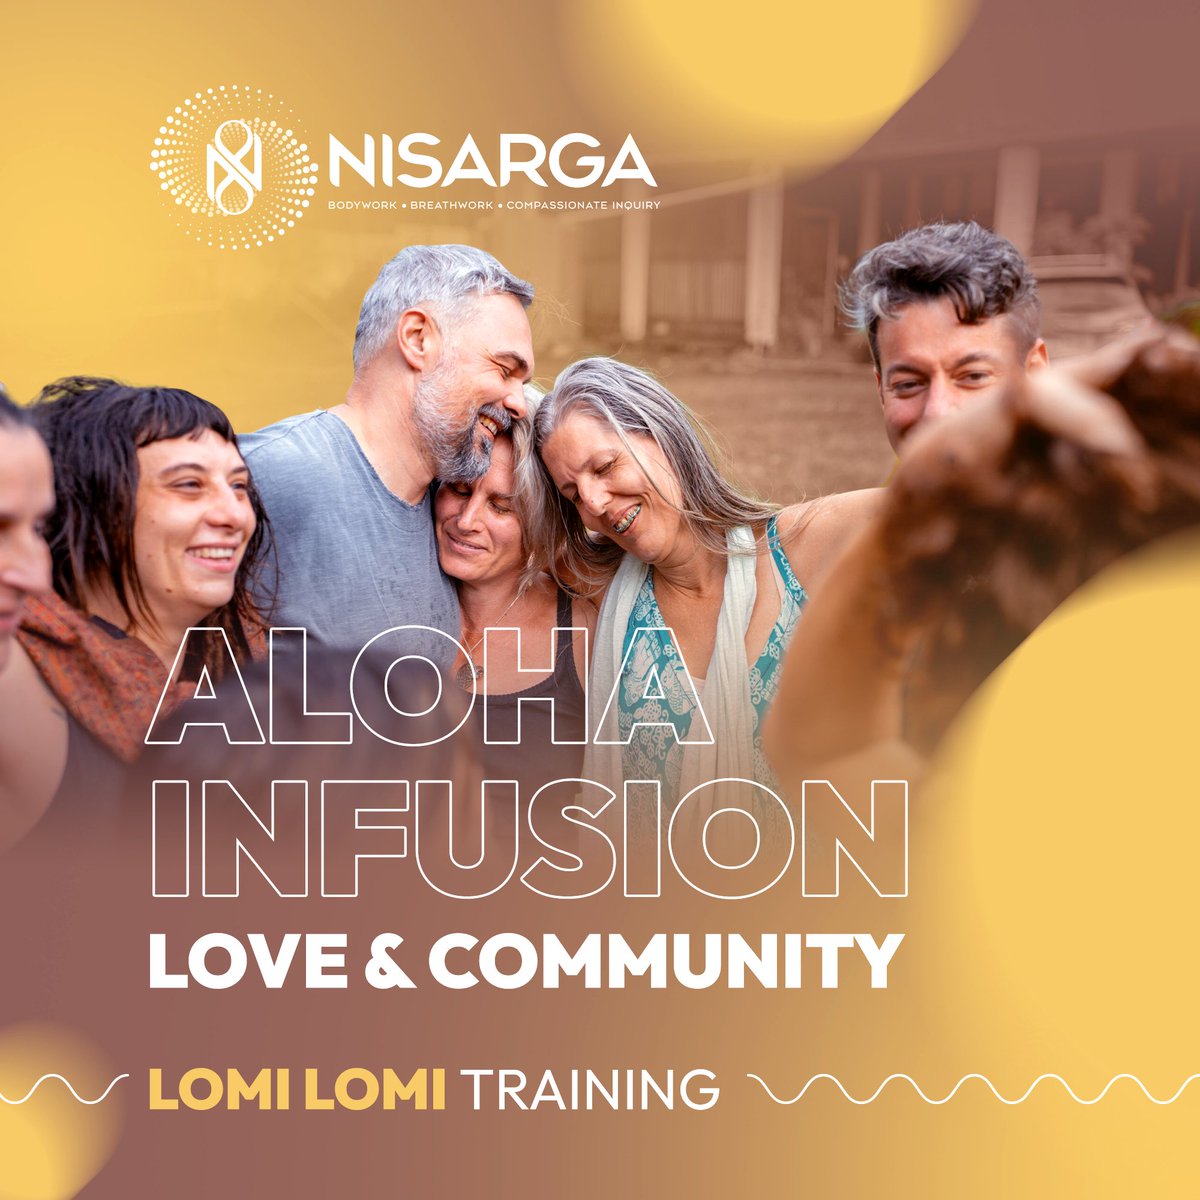 Community plays a significant role in Lomi massage, extending beyond the practitioner and recipient to encompass a broader sense of interconnectedness and support.#lomilomimassage #community #interconnectedness #collectivegrowth #innerguidance #higherpurpose #unity #holistic